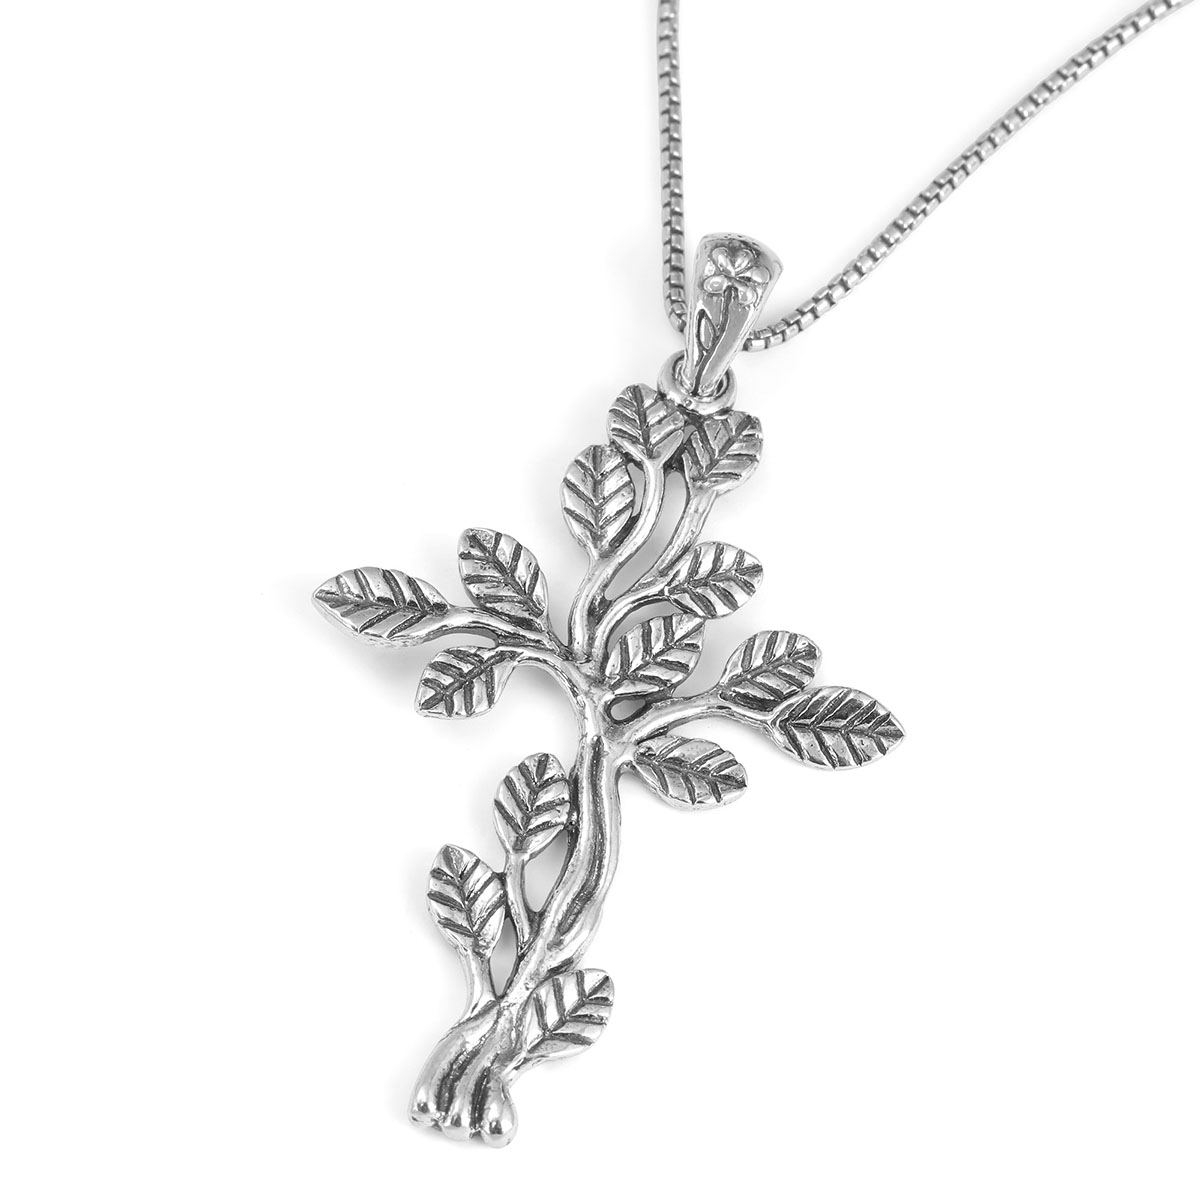 Sterling Silver Cross Necklace With Tree of Life Design - 1